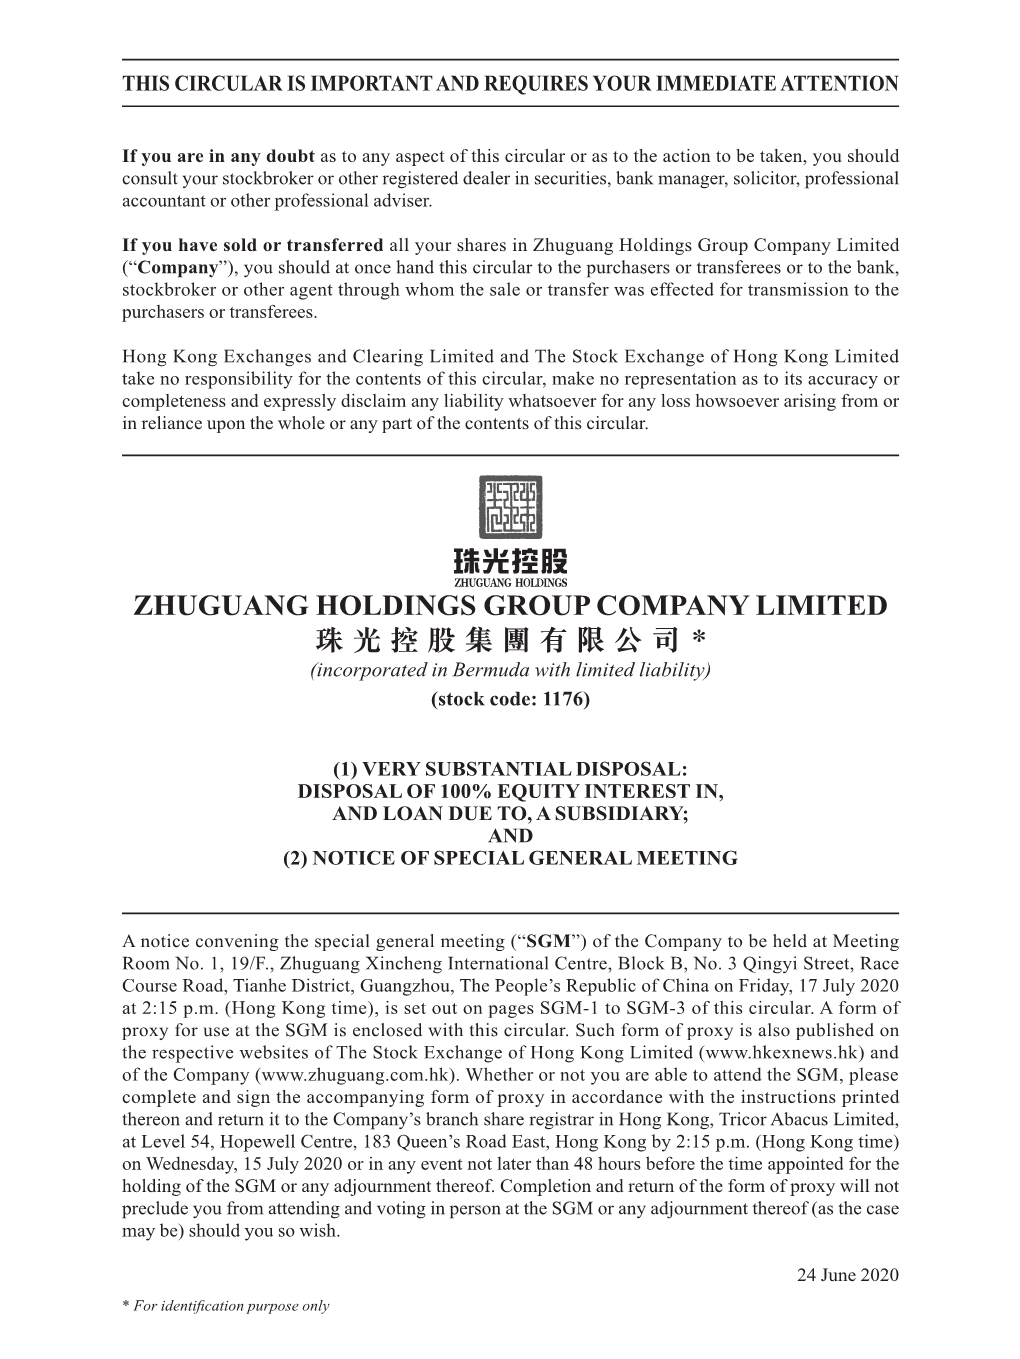 Zhuguang Holdings Group